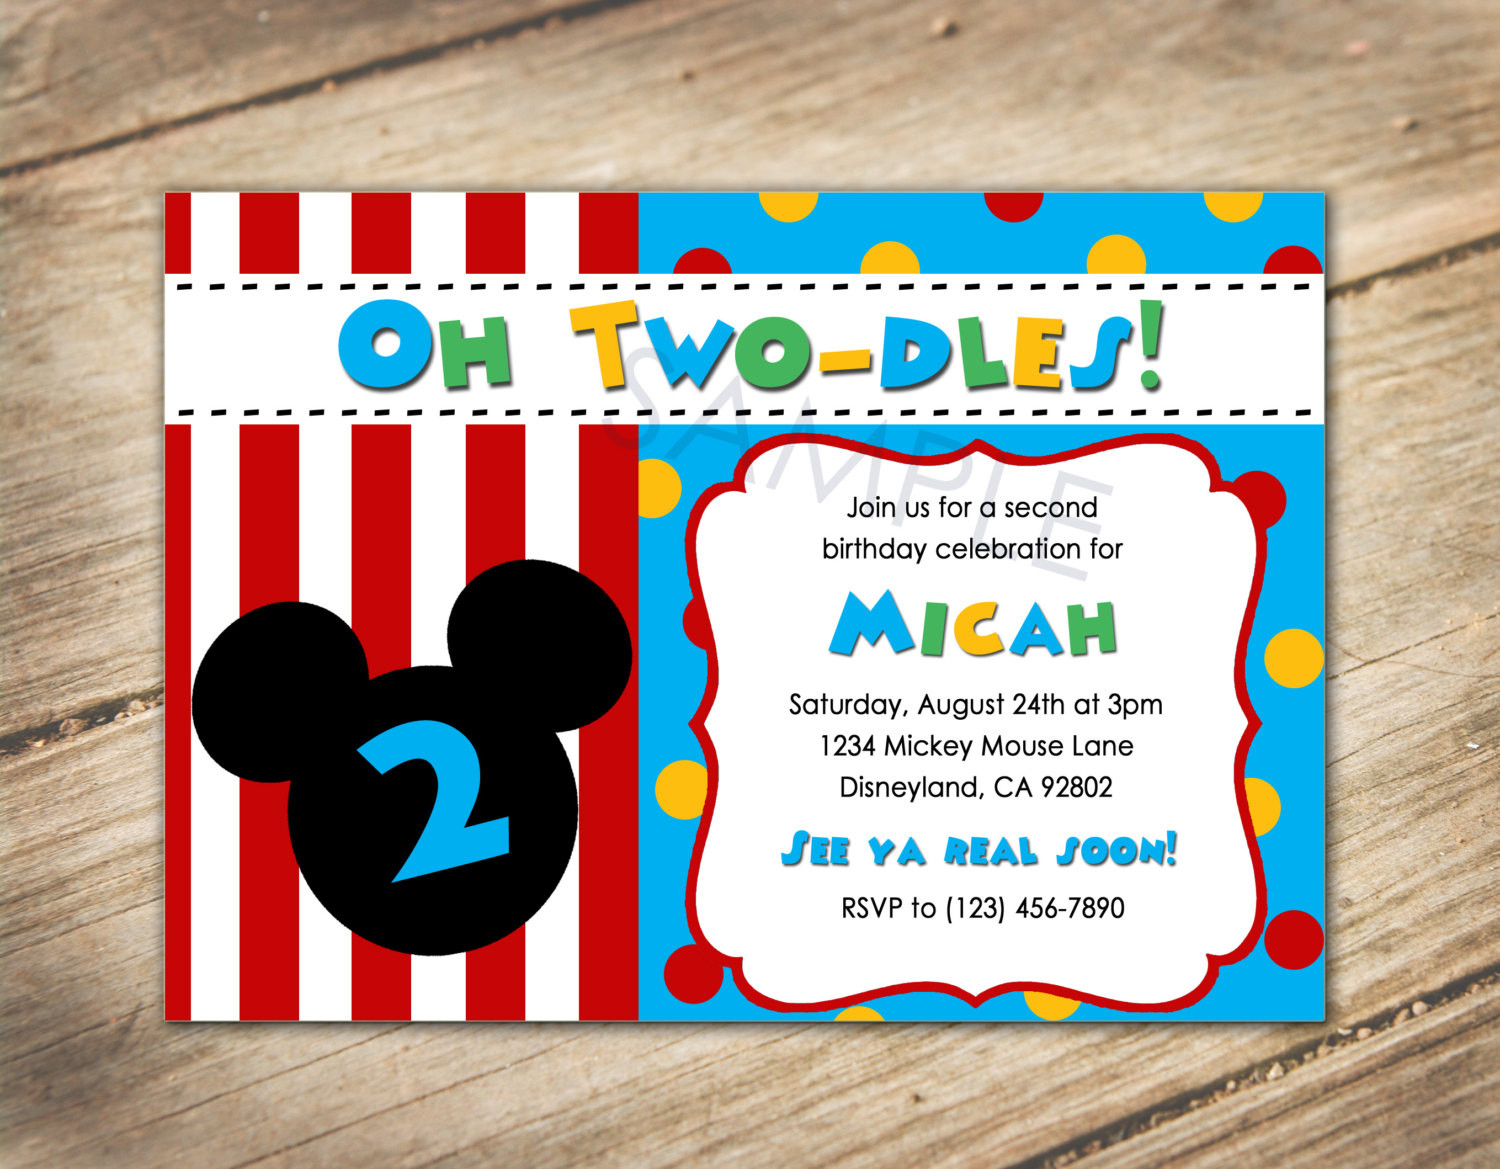 Mickey Mouse 2nd Birthday Invitations
 Oh Two dles 2nd Birthday Mickey Disney Theme Invitation